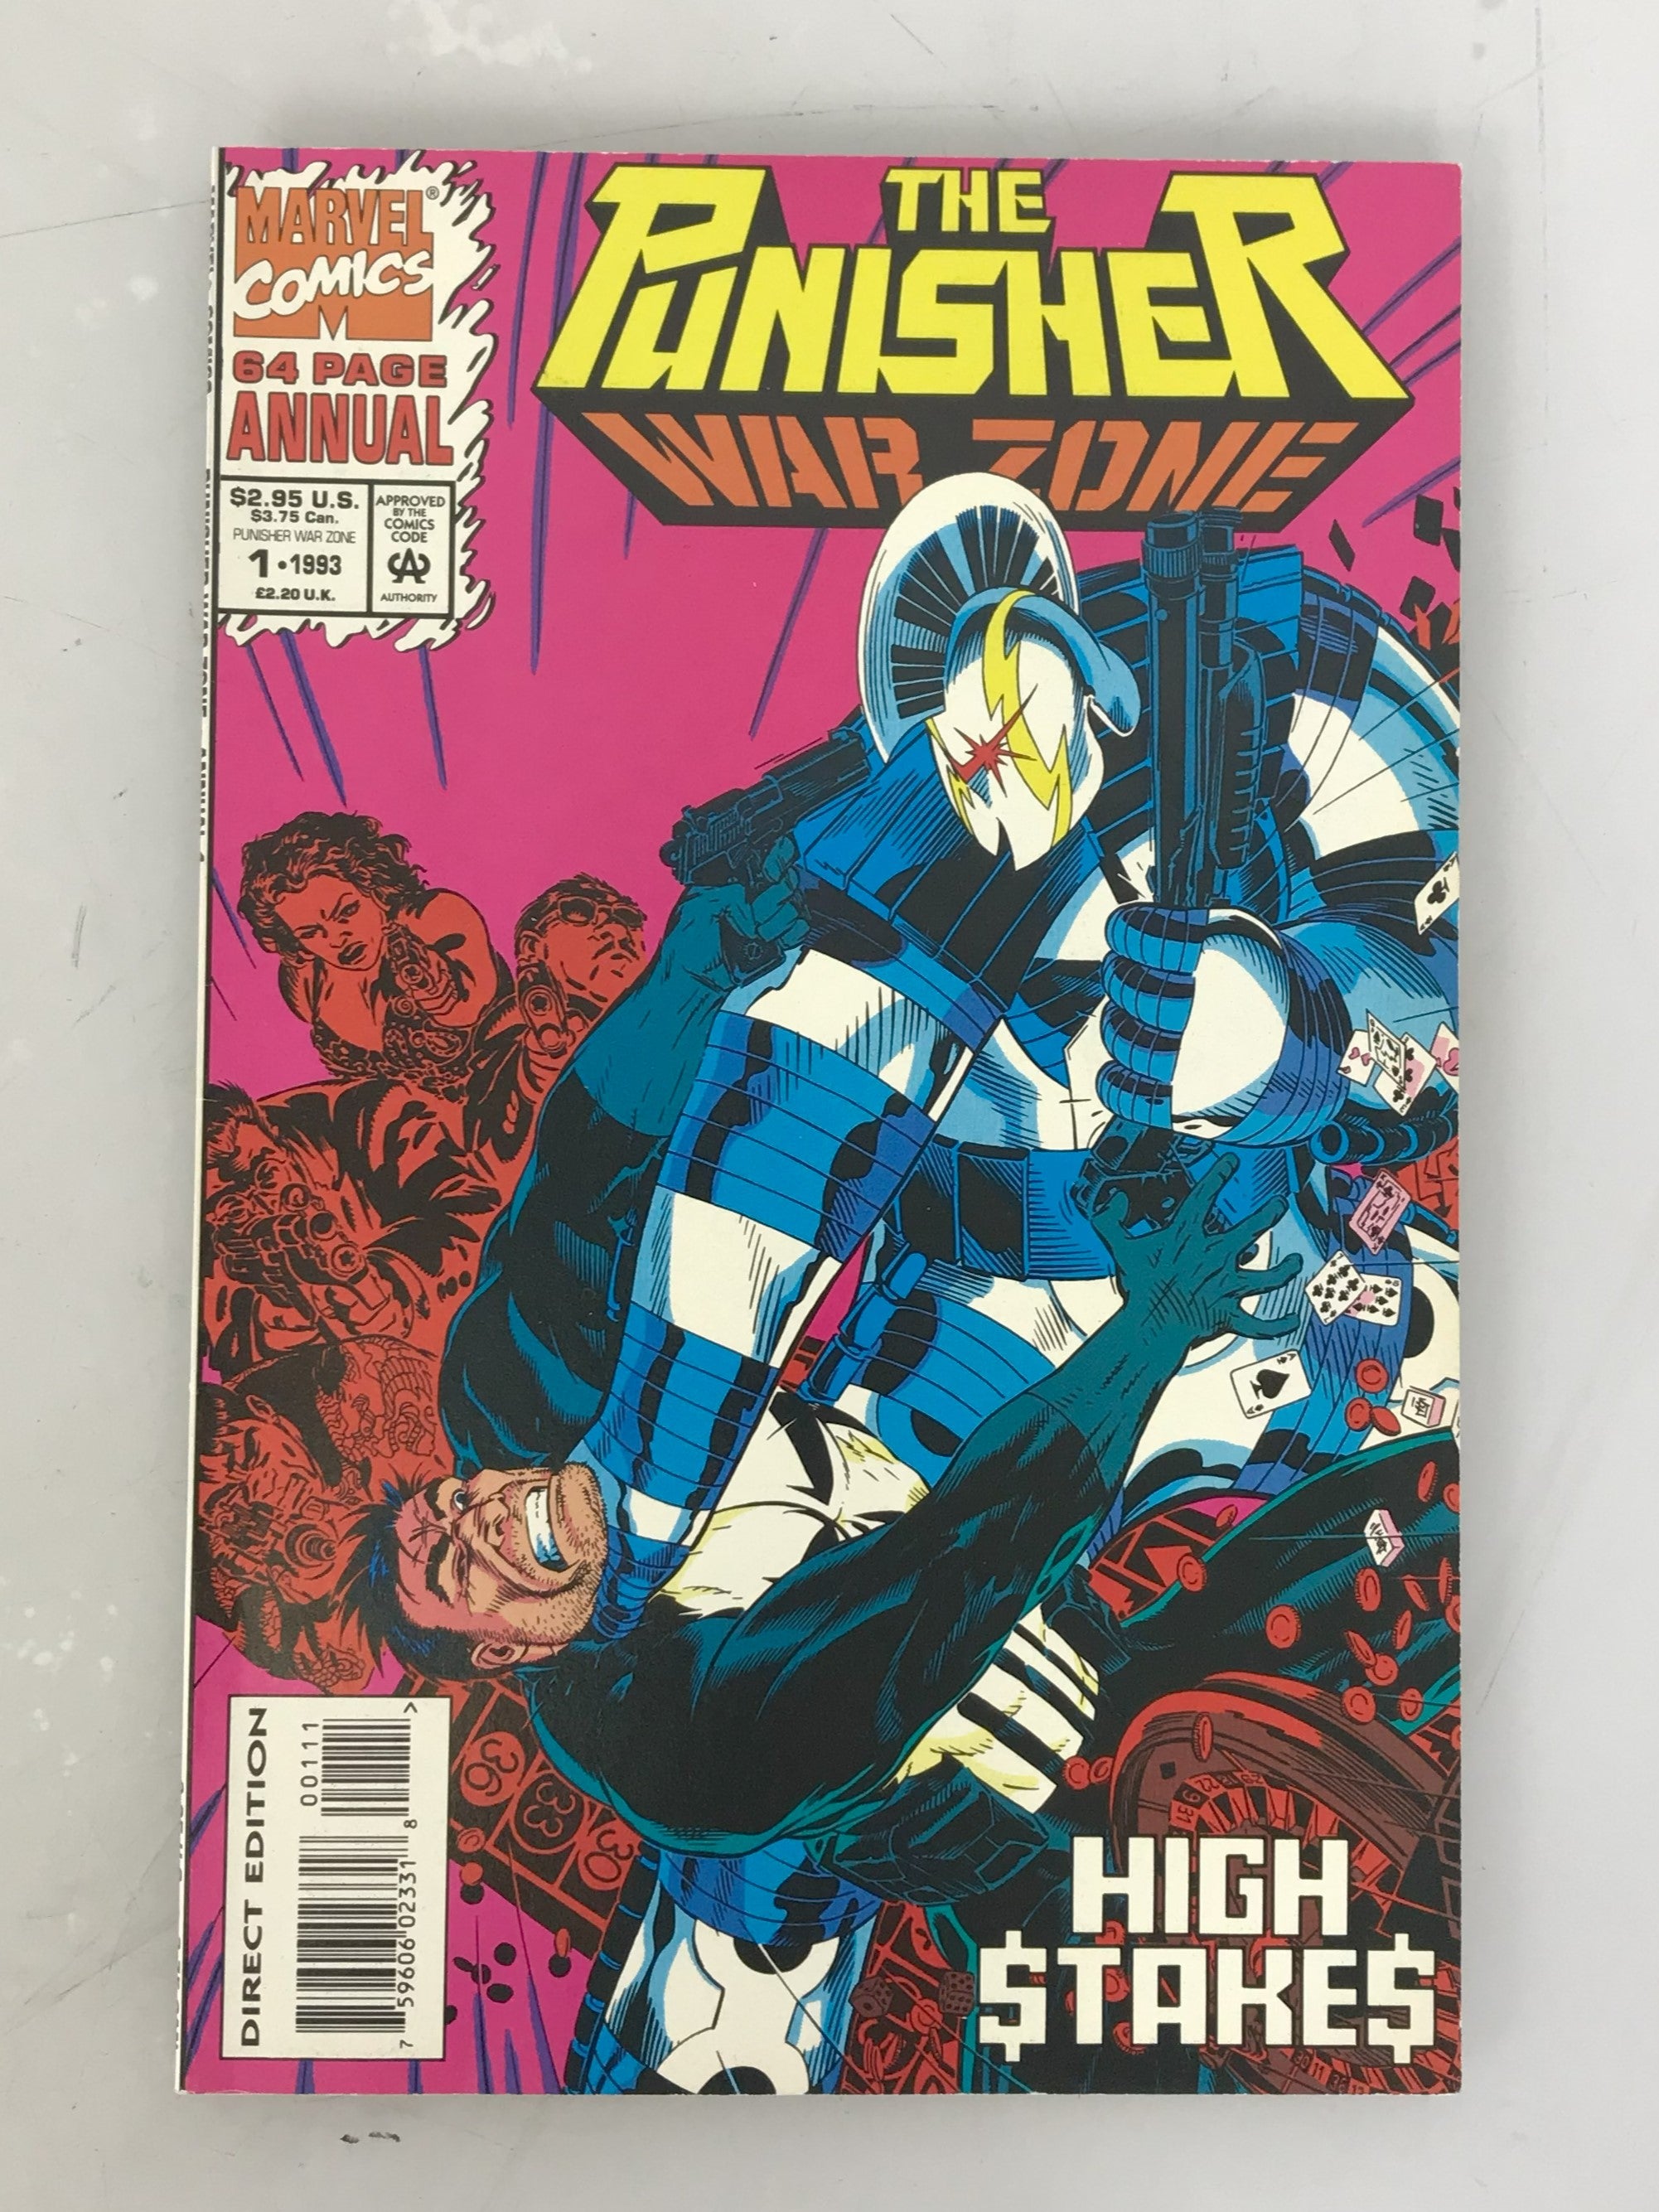 The Punisher: War Zone Annual 1 1993